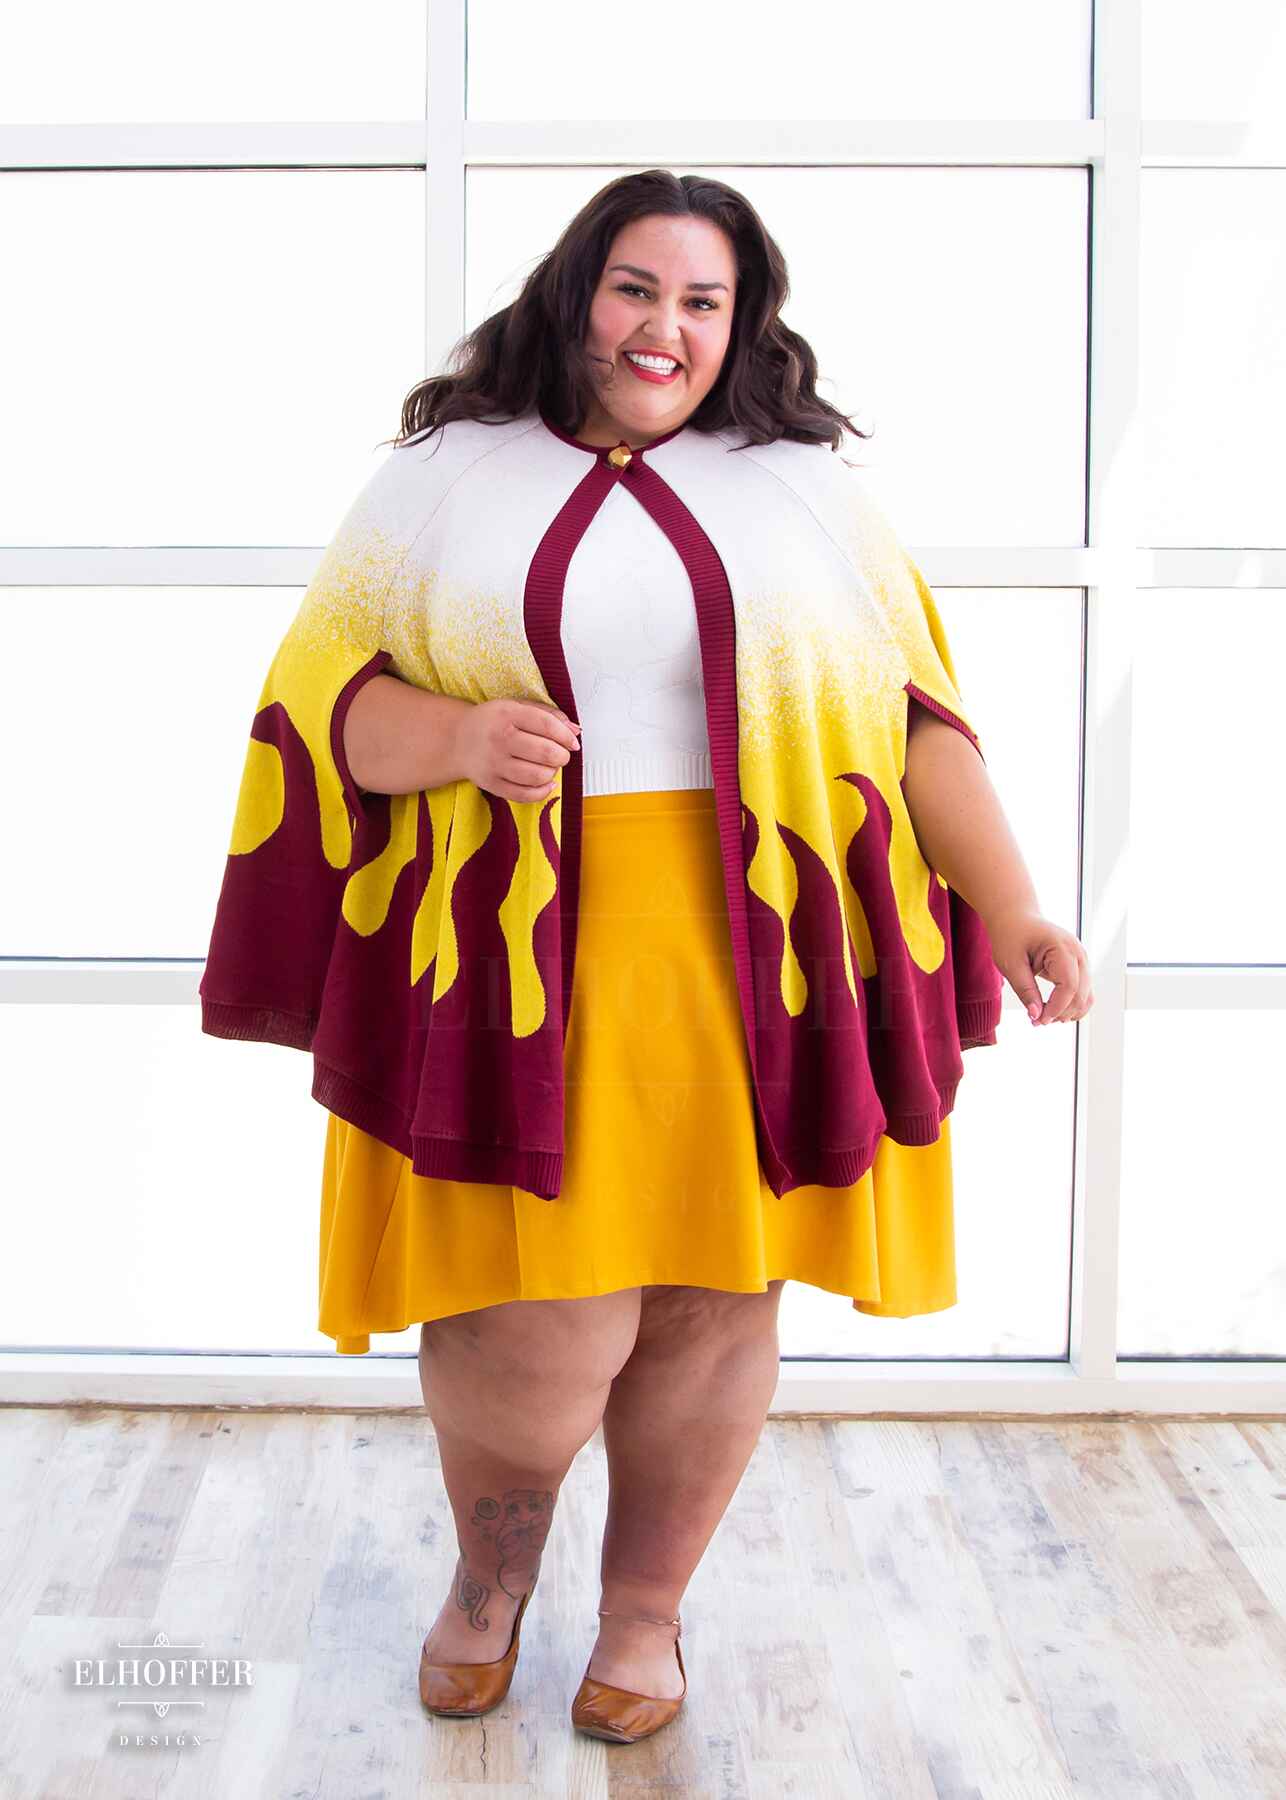 Kristen, a sun kissed skin 4xl model with shoulder length wavy dark brown hair, is smiling while wearing a below hip length knit cape. The cape is a gradient of color from white at the shoulders, to yellow, to a red fire design at the bottom, it also has a button closer at the neck, and armholes in the side seam. She paired the cape with a white knit crop top and a golden yellow knee length high low skirt.